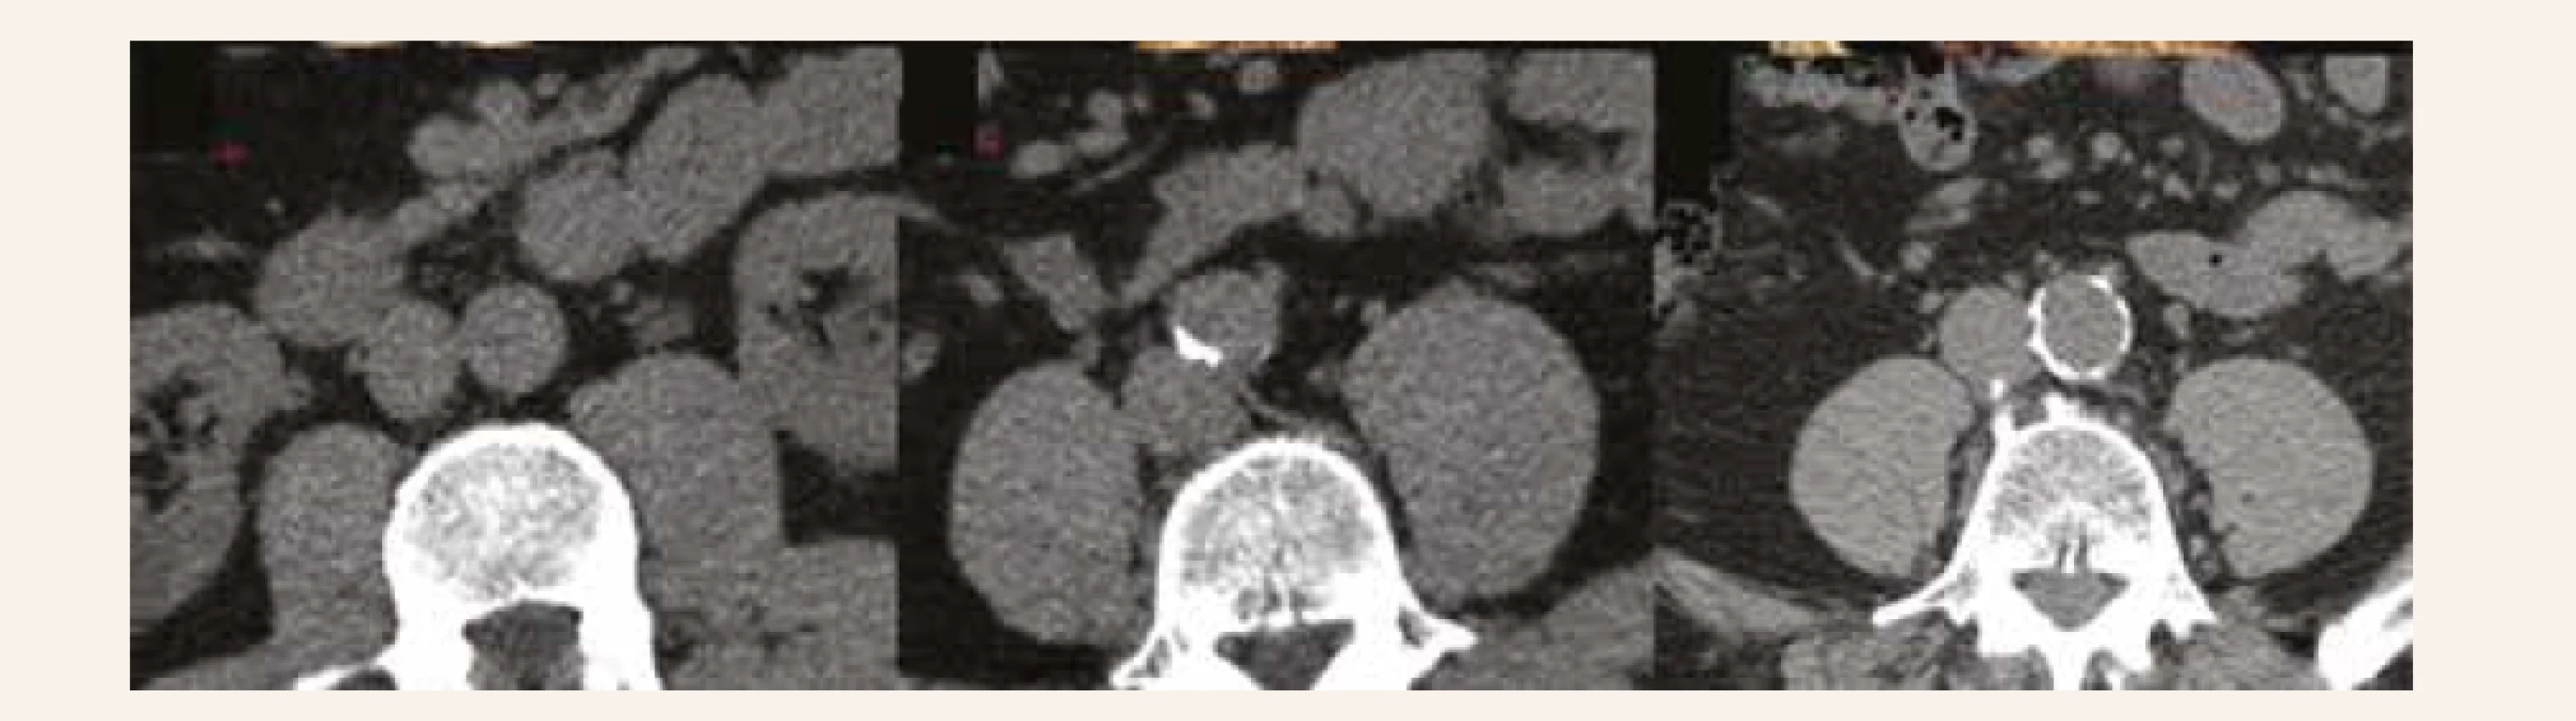 Axial slices presenting abdominal QCT scans: no abdominal aortic calcification (left panel),
mild calcification limited to right posterior quandrant (middle panel), and severe calcification nearly
on the entire circumference (right panel). Reproduced with senior author´s permission [26]